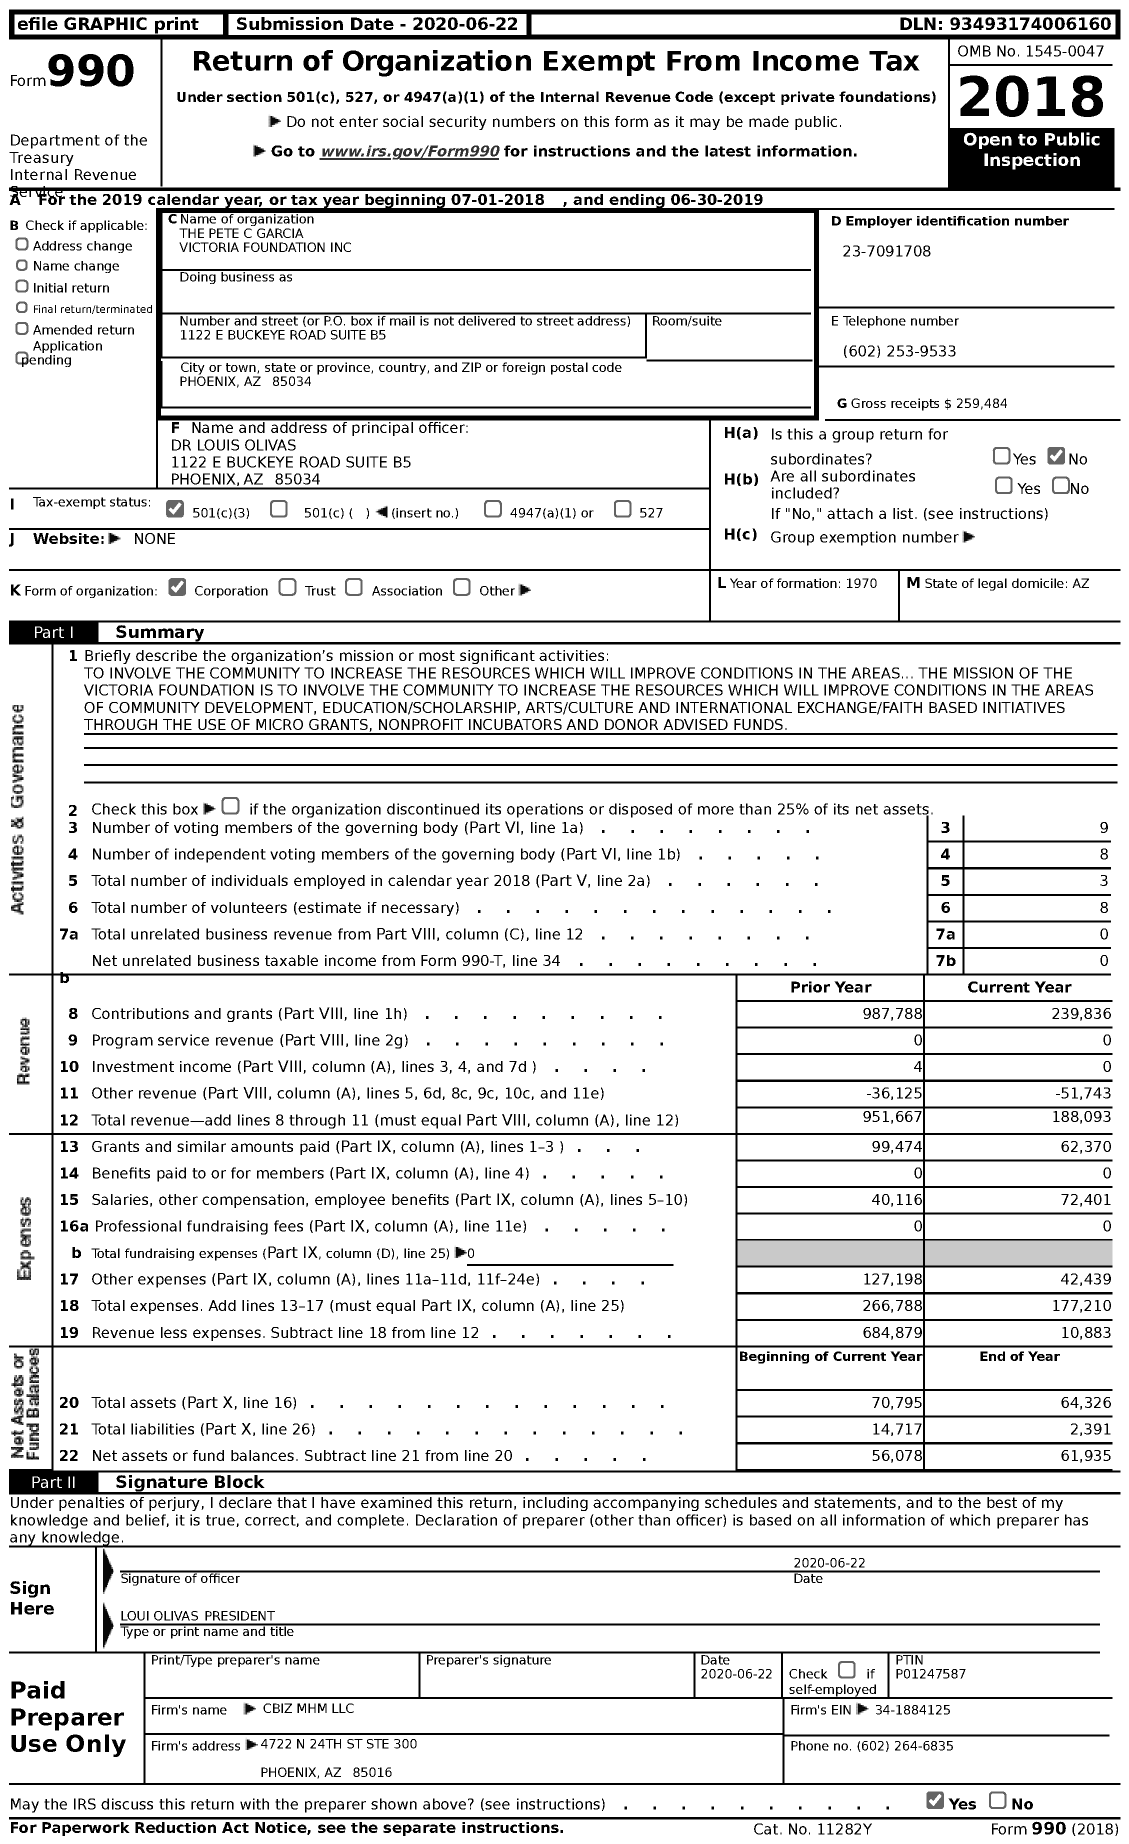 Image of first page of 2018 Form 990 for The Pete C Garcia Victoria Foundation